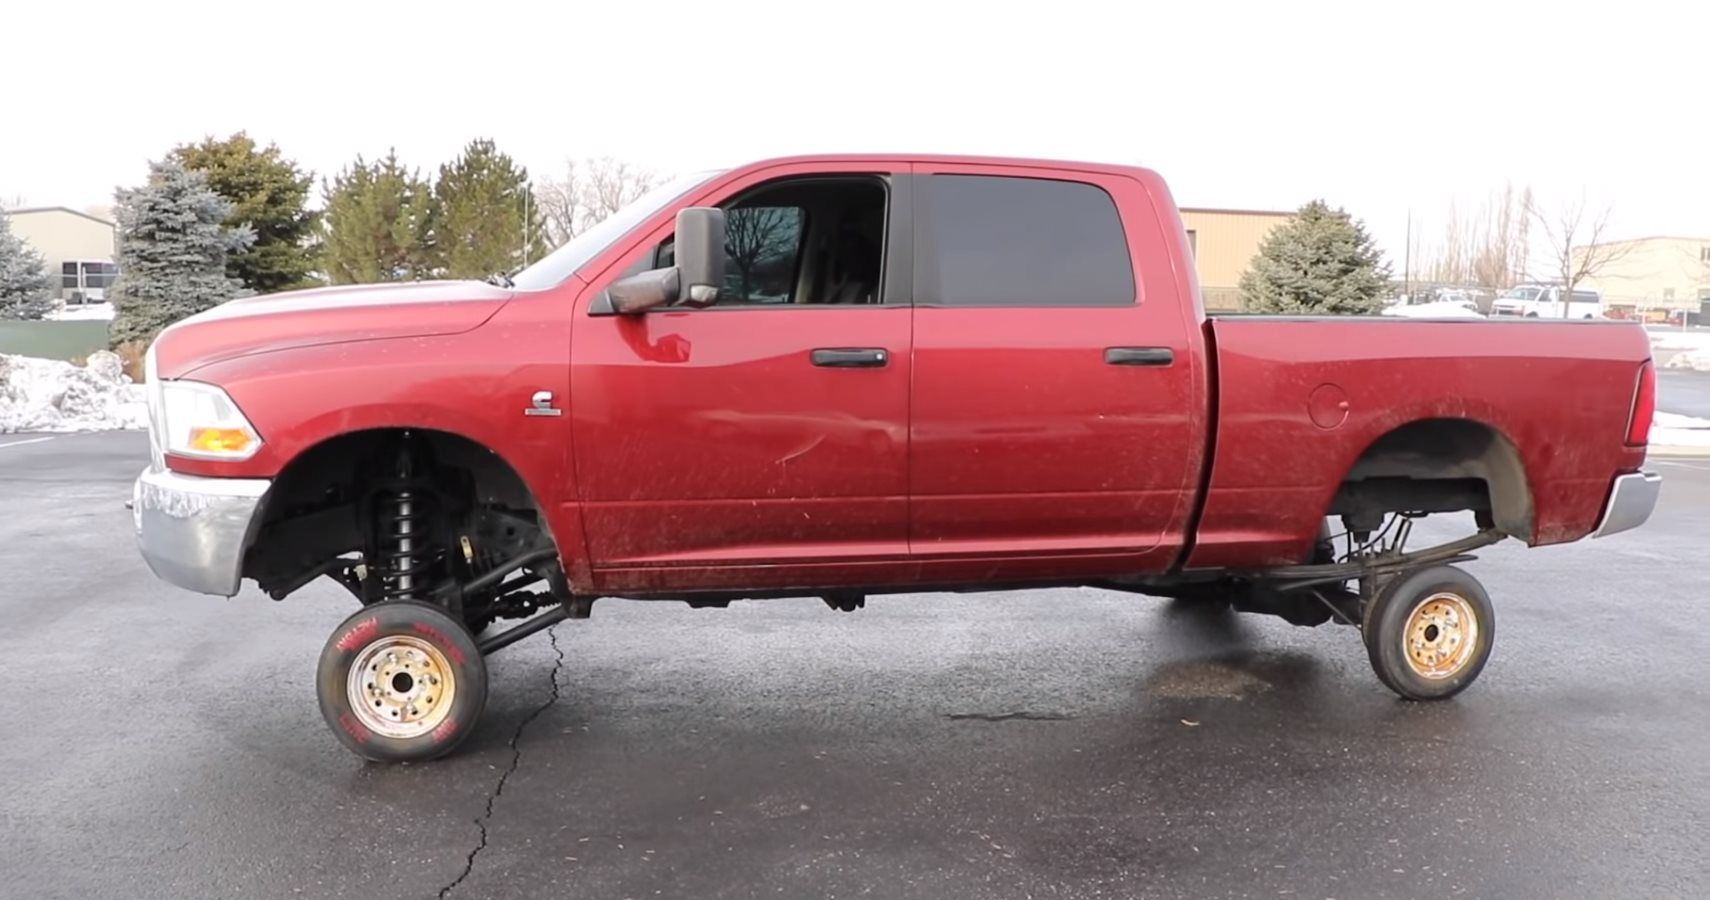 Insane Gearhead Puts Tiny Tires On His Ram Pickup With Hilarious Results